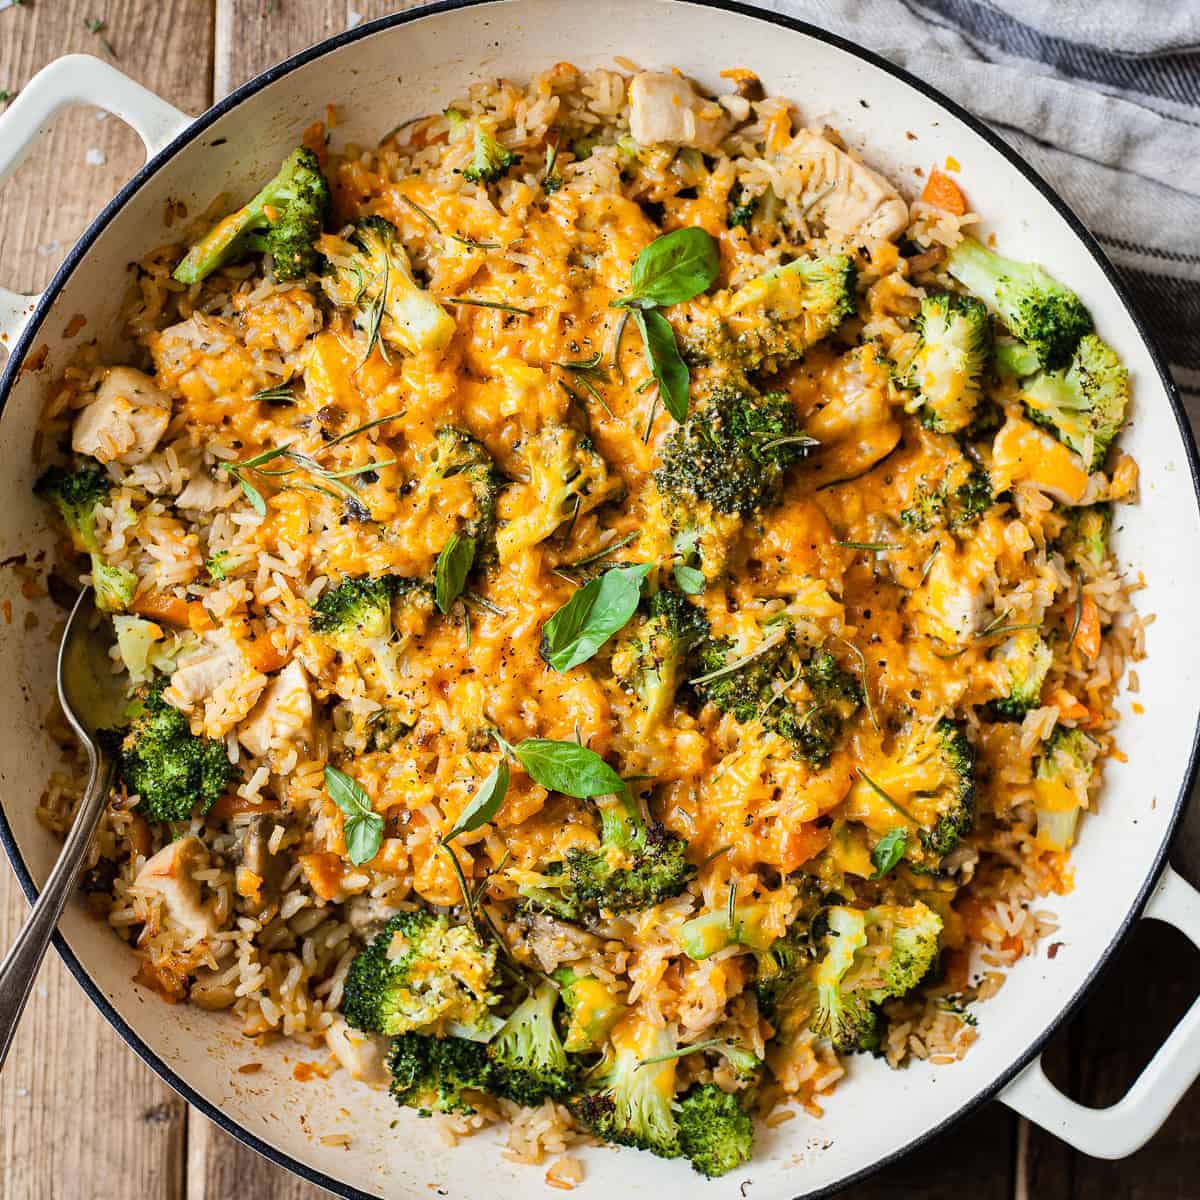 Cheddar broccoli chicken bake with rice. All ingredients from Aldi.